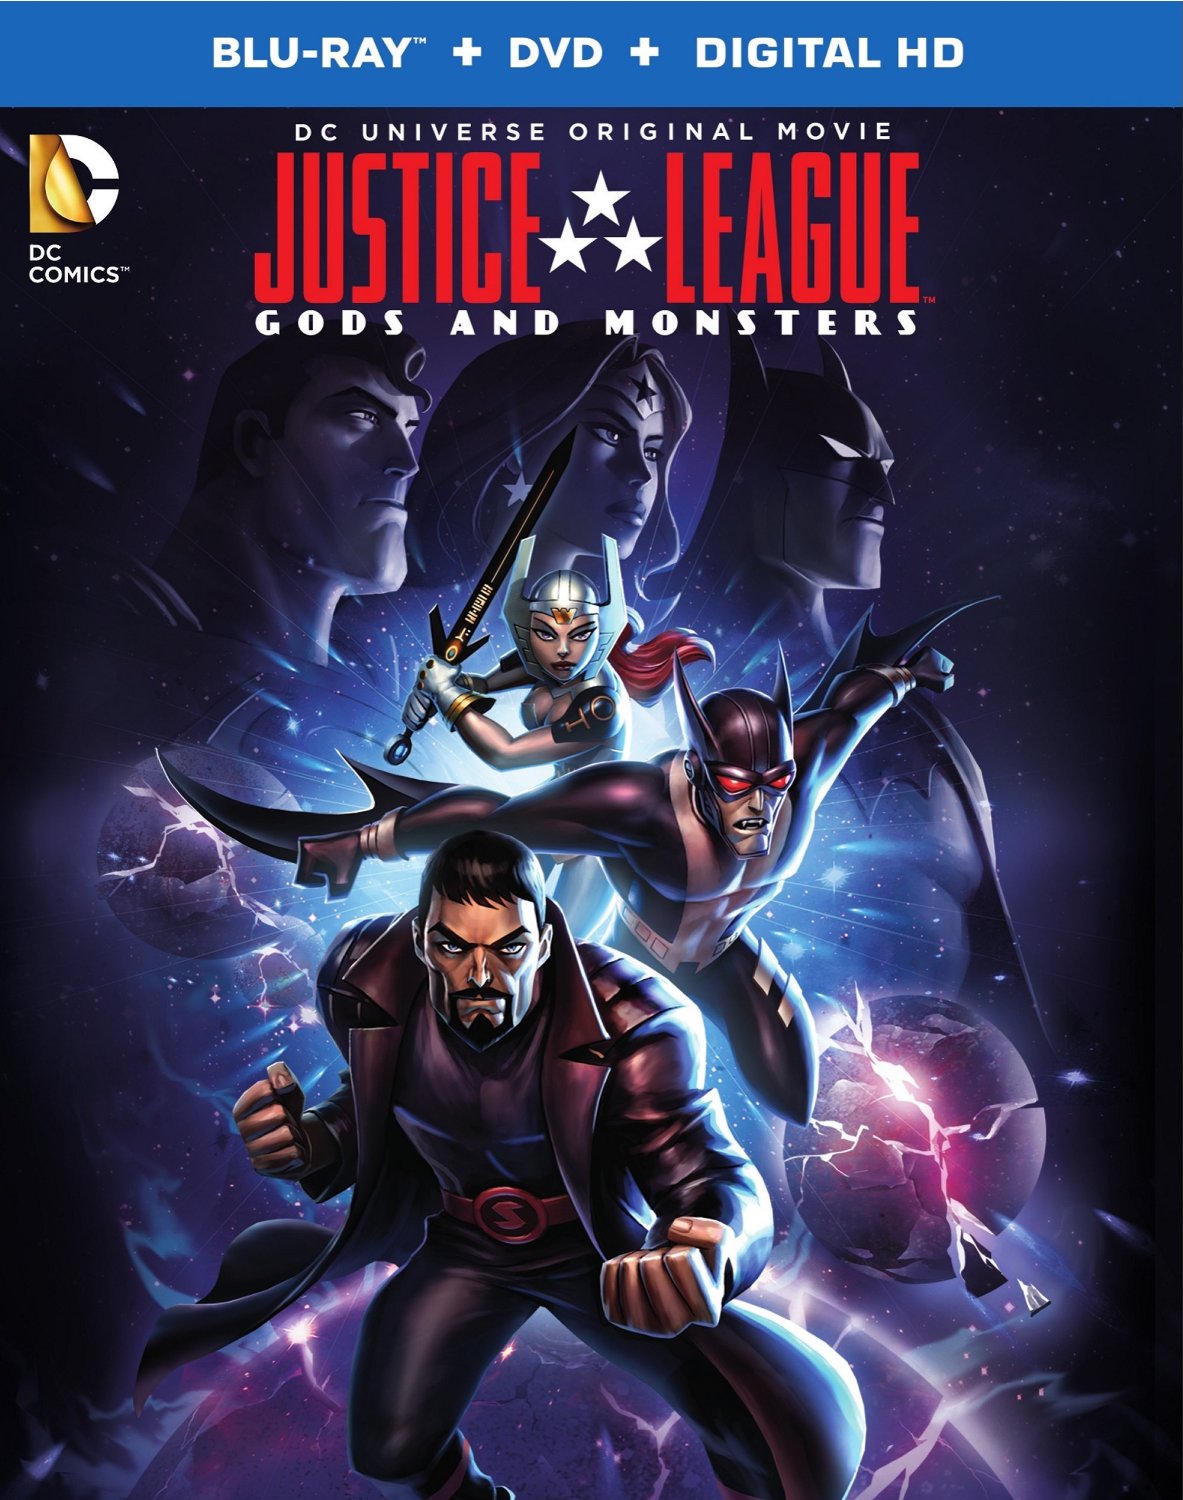 Justice League: Gods and Monsters Chronicles (2015) short